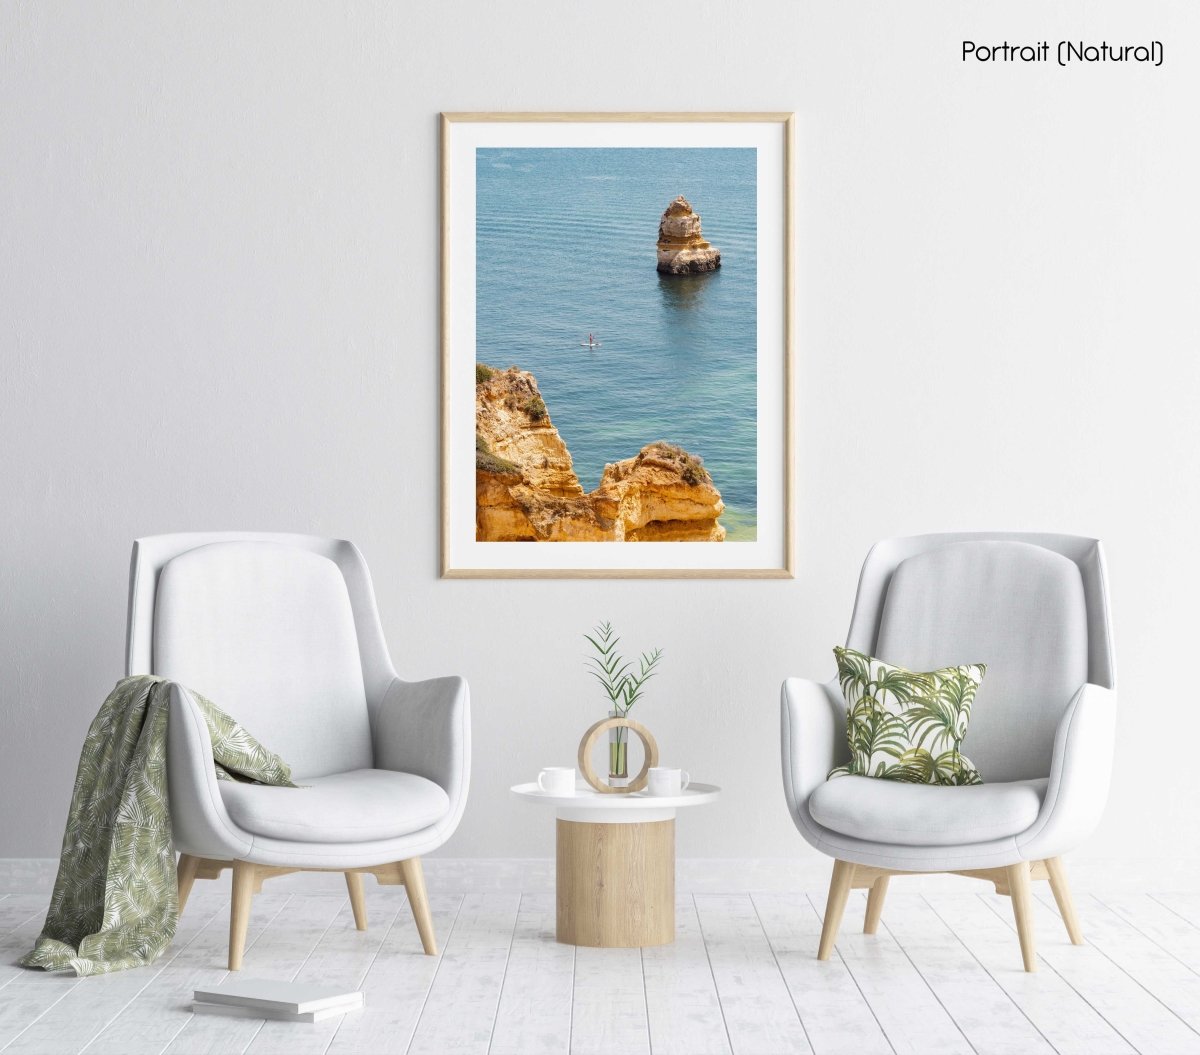 Woman on a SUP in the ocean along Lagos blue water and cliffs in a natural fine art frame